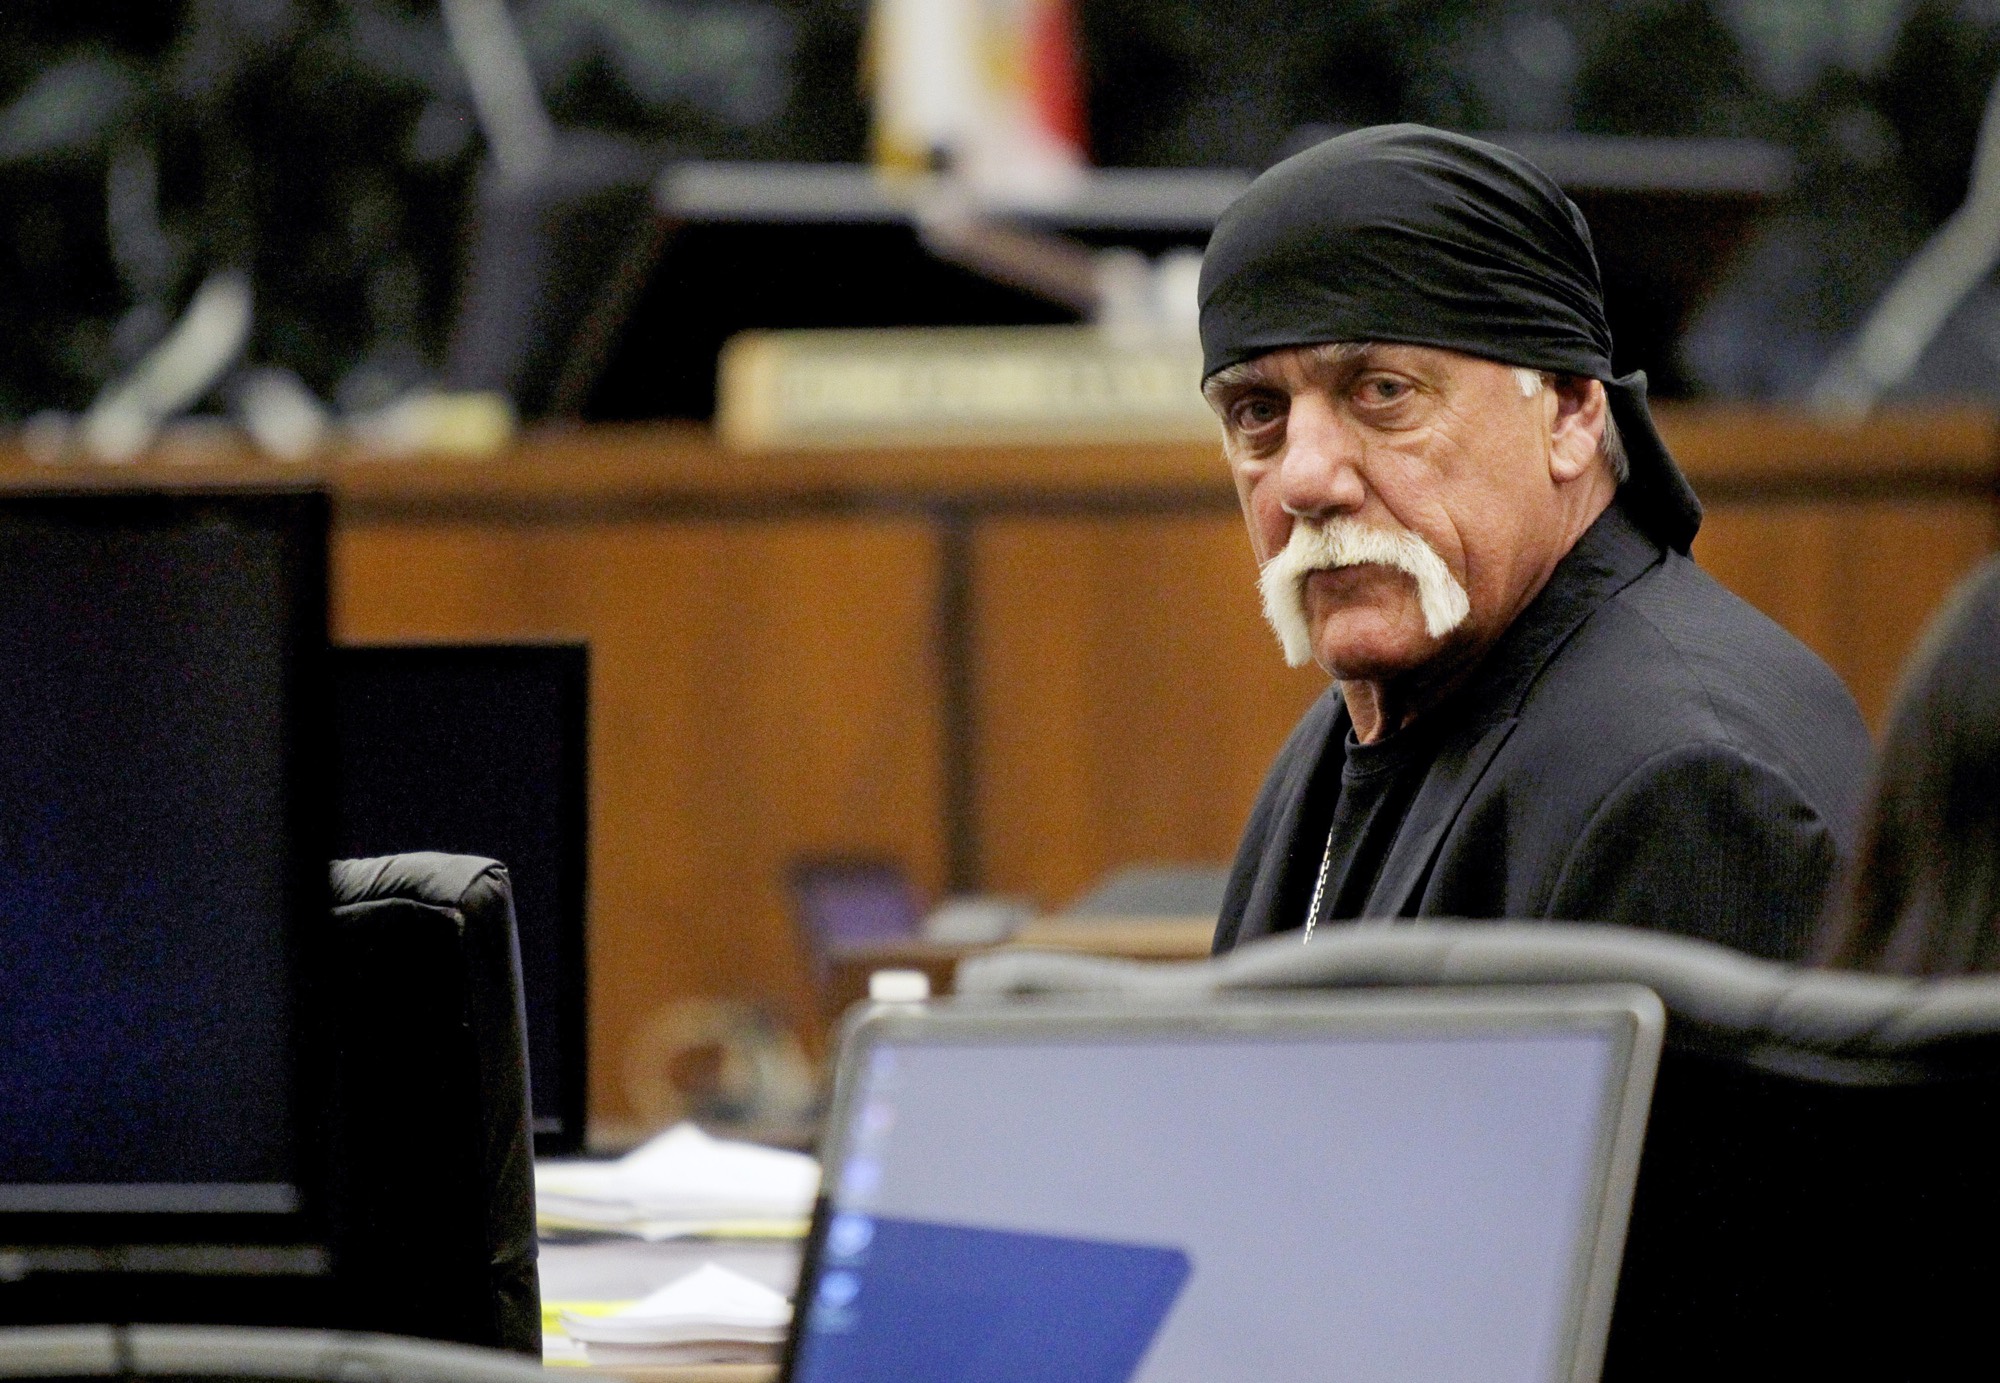 Terry Bollea, aka Hulk Hogan, sits in court during his trial against Gawker Media, in St Petersburg, Florida March 17, 2016.  Reuters